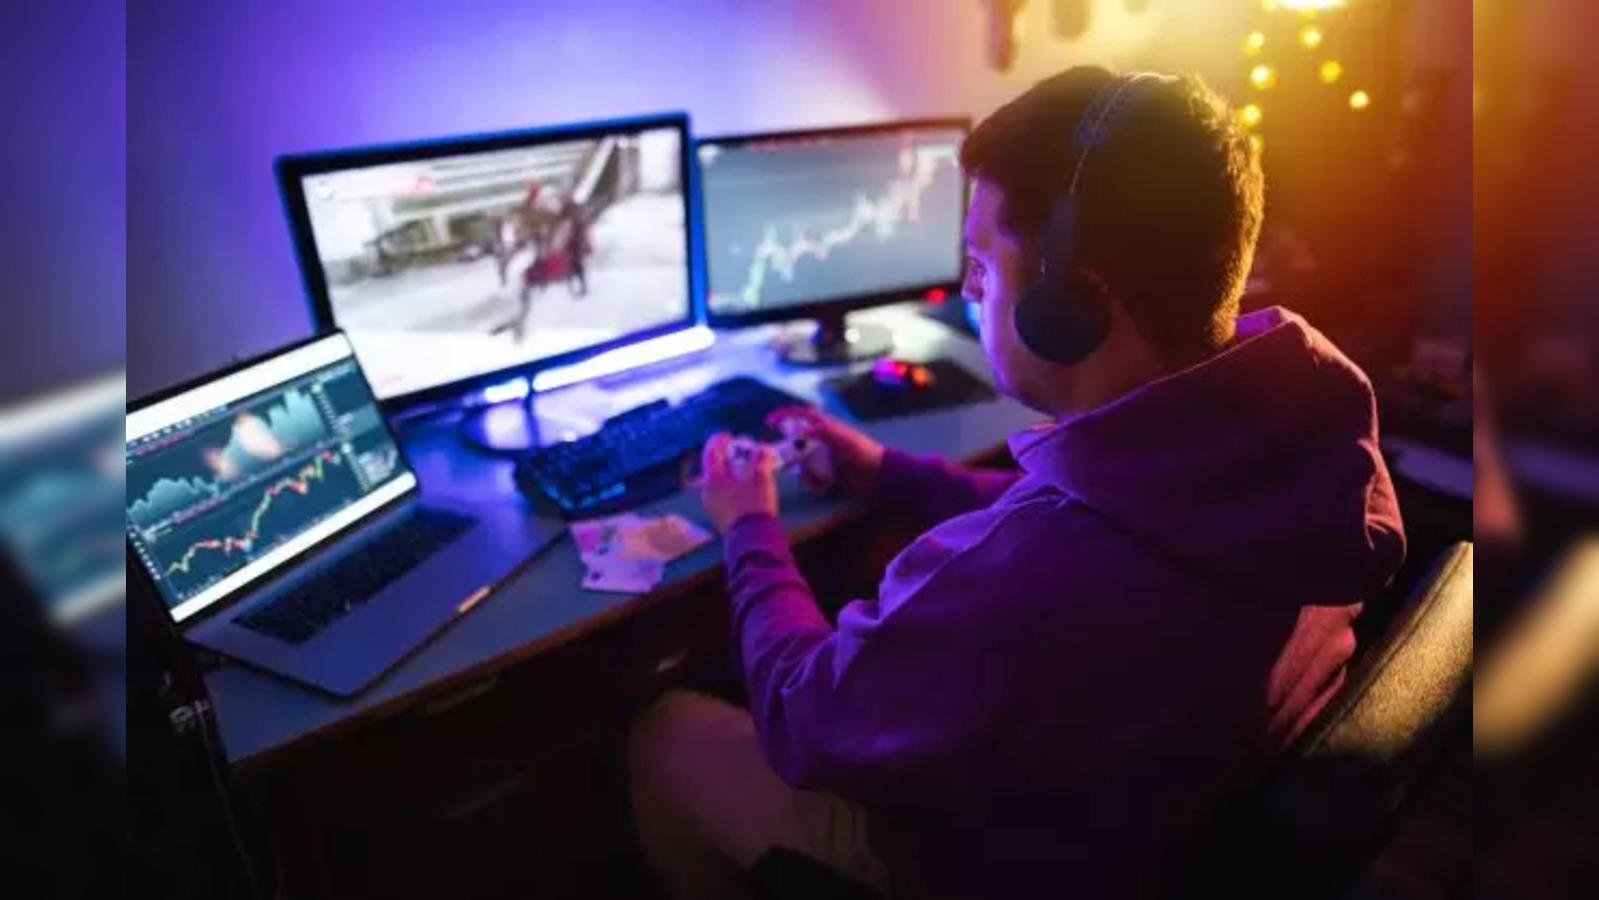 online games: Online games use dark designs to collect players' data, finds  study - The Economic Times